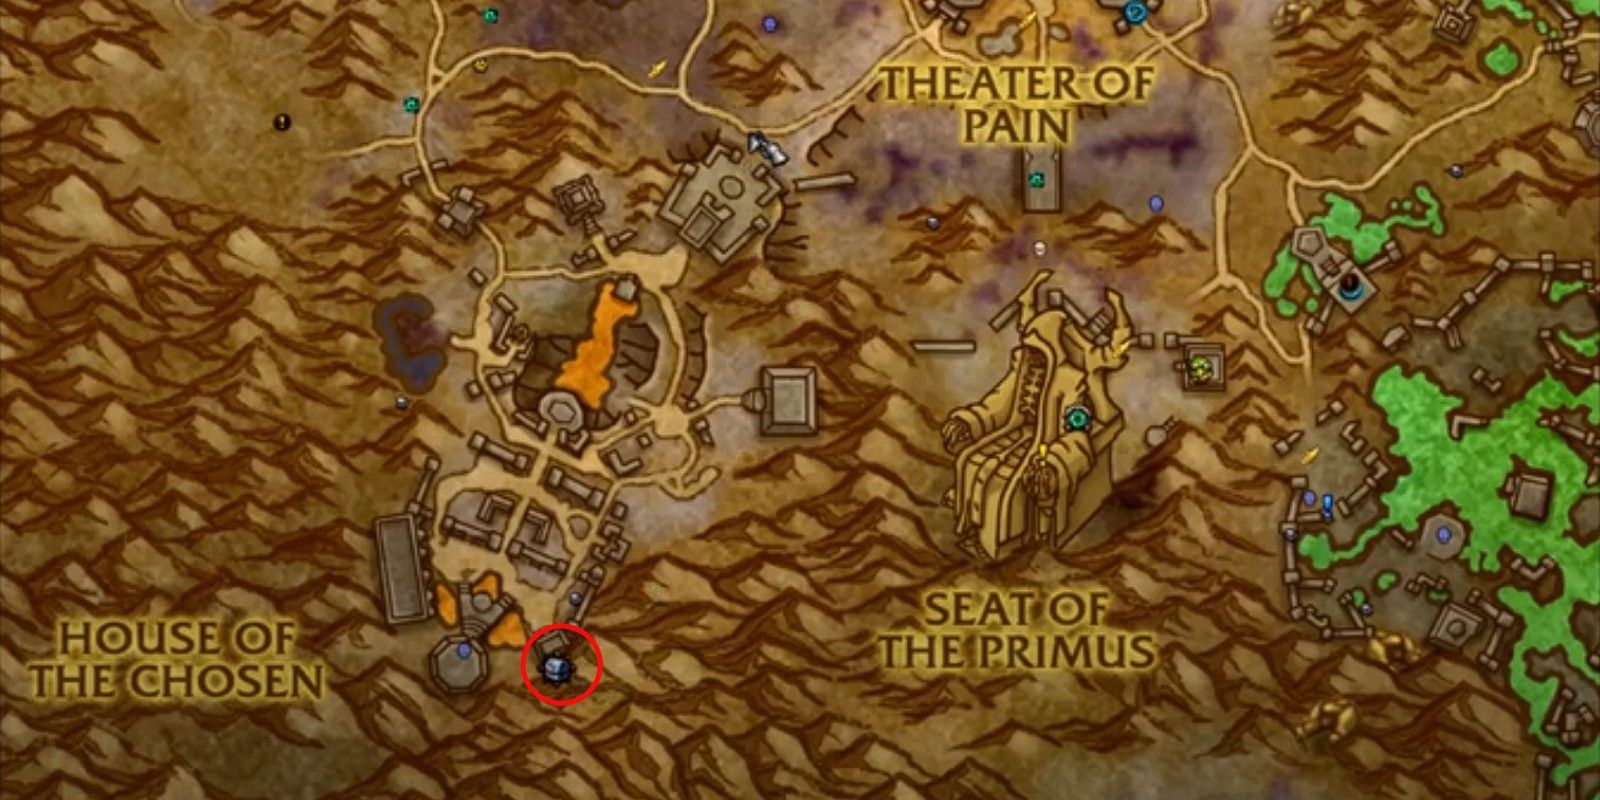 The second possible spawn location for the Bonebound Chest on the map in World of Warcraft: Shadowlands